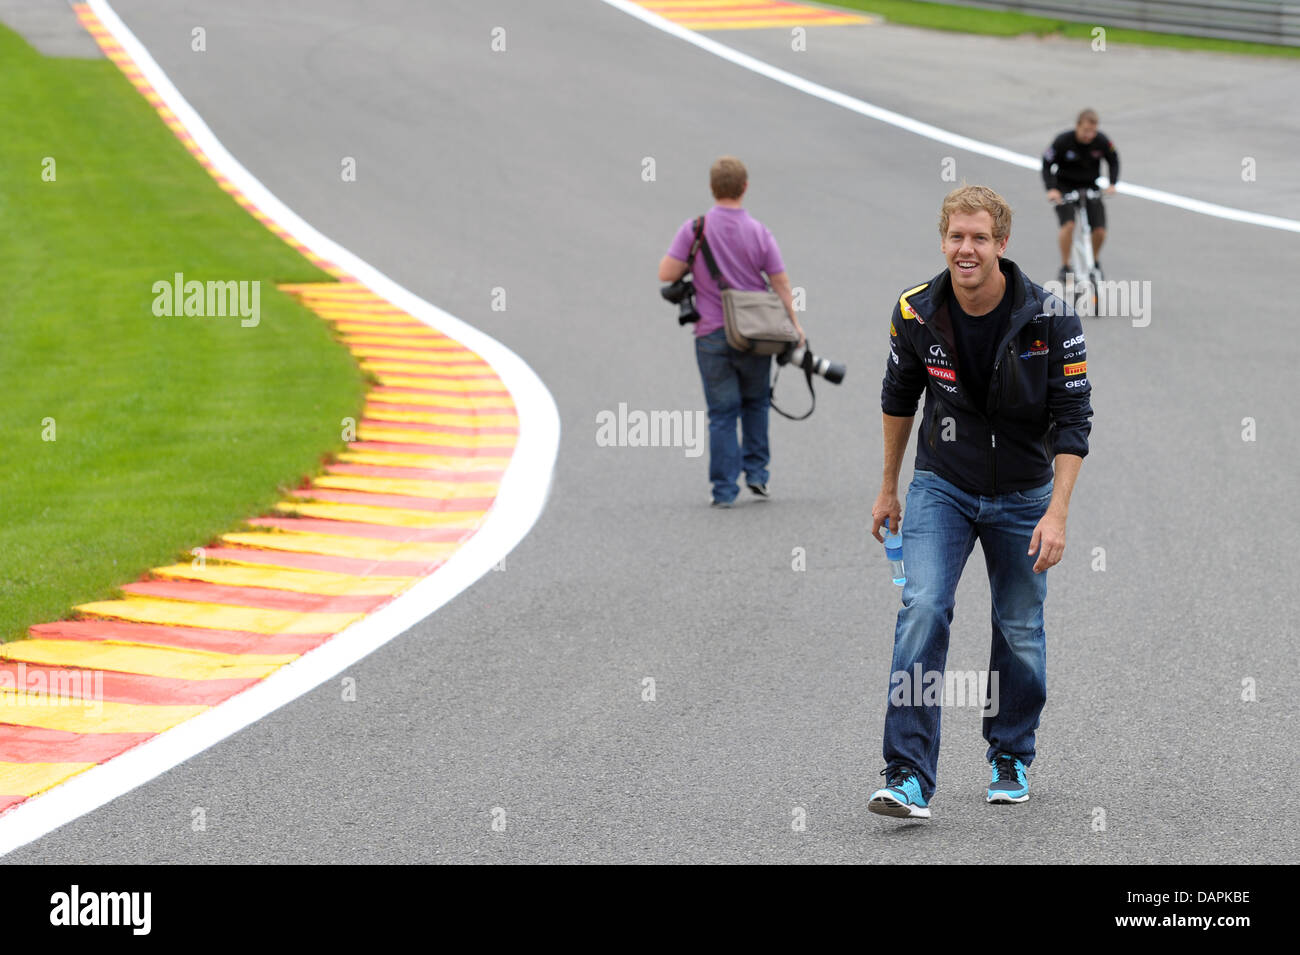 German Formula One driver Sebastian Vettel of Red Bull walks up the Eau Rouge corner at the race track Circuit de Spa-Francorchamps near Spa, Belgium, 25 August 2011. The Formula One Grand Prix of Belgium will take place on 28 August 2011. Photo: David Ebener Stock Photo